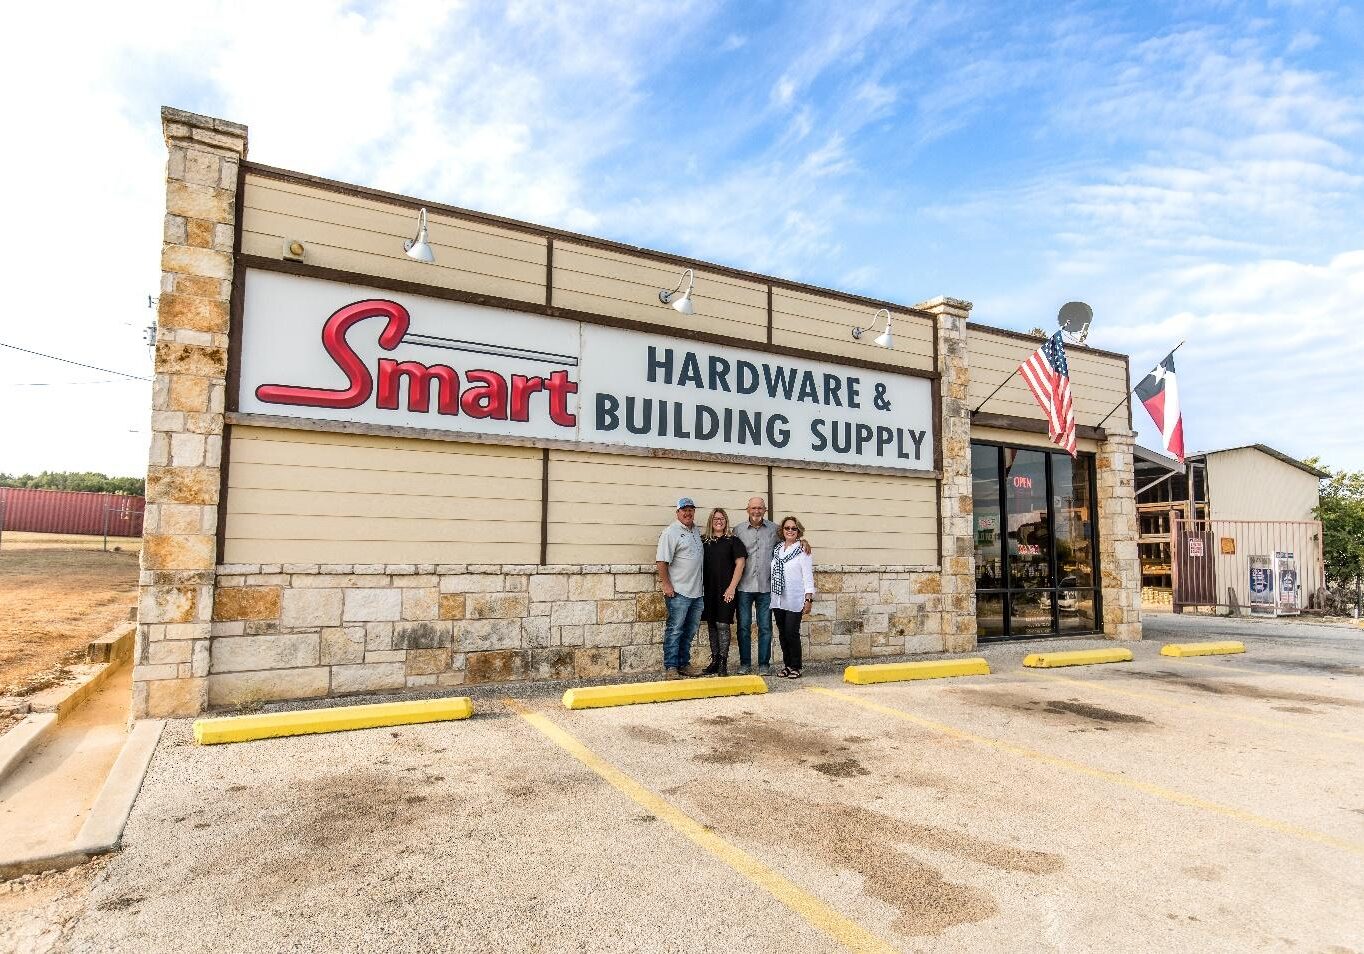 Three people standing in front of a building with the smart hardware & building supply sign on it.